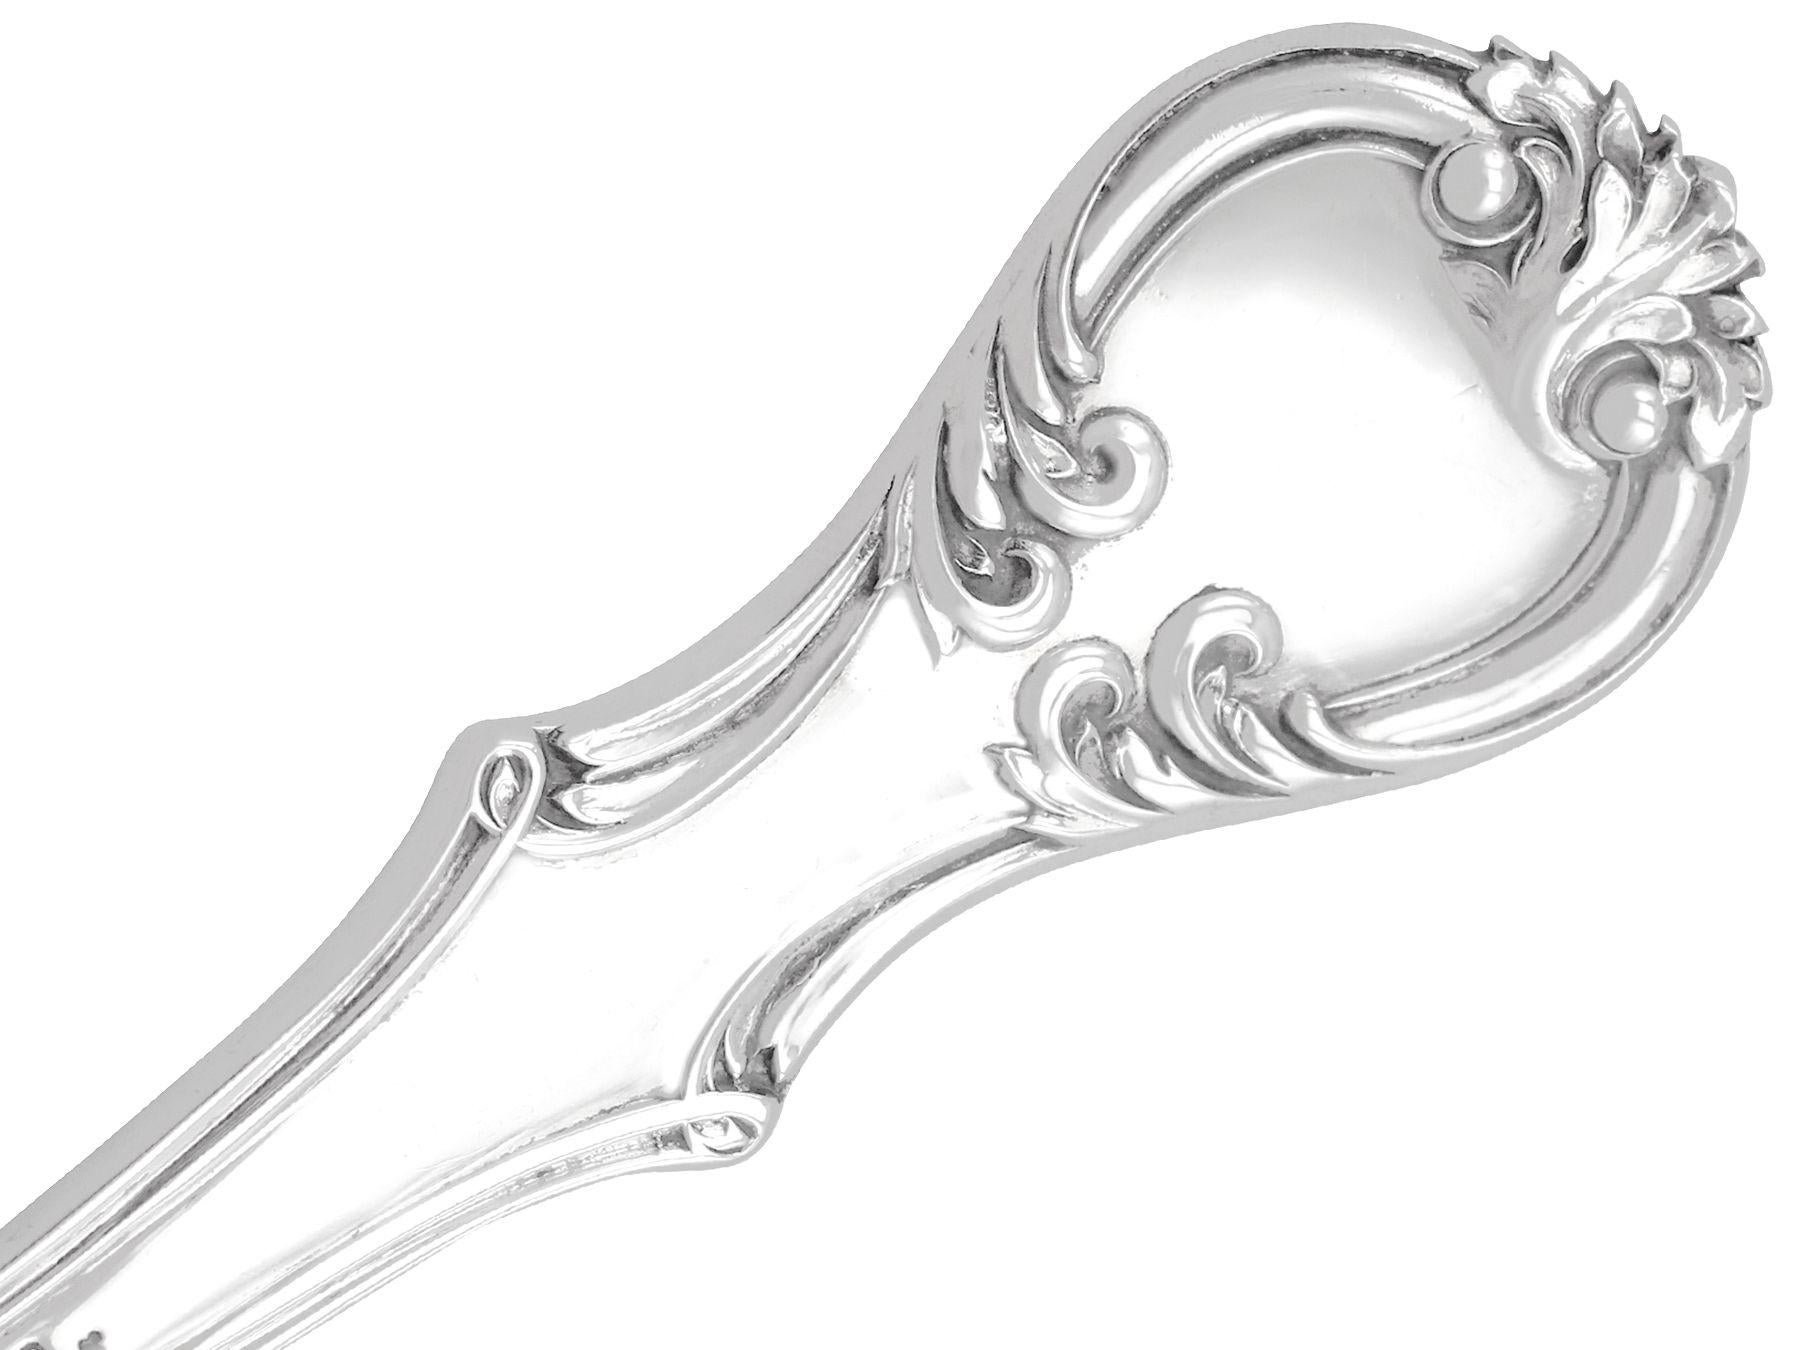 Antique 1800s Victorian Sterling Silver Cheese Scoop In Excellent Condition For Sale In Jesmond, Newcastle Upon Tyne